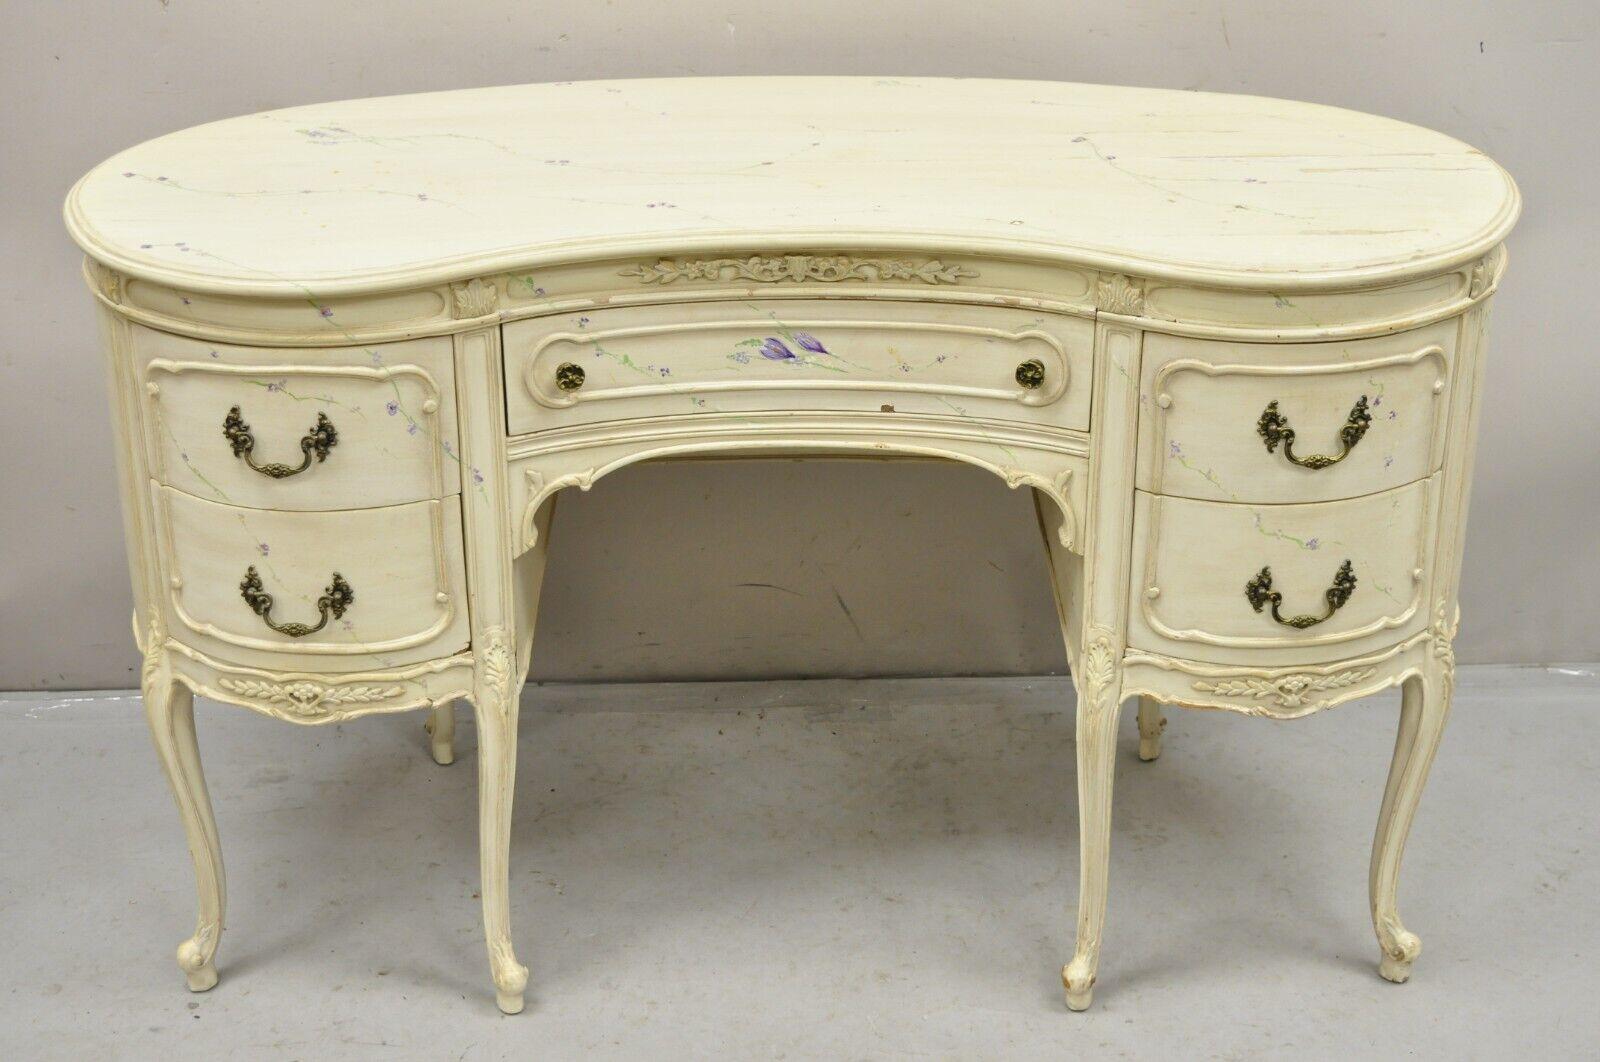 Vintage John Stuart White Painted French Louis XV Kidney Shaped Vanity and Bench. Item features hand painted purple flower and green vine accents, 5 drawers, shapely cabriole legs, painted finished back, matching vanity bench, original label, great